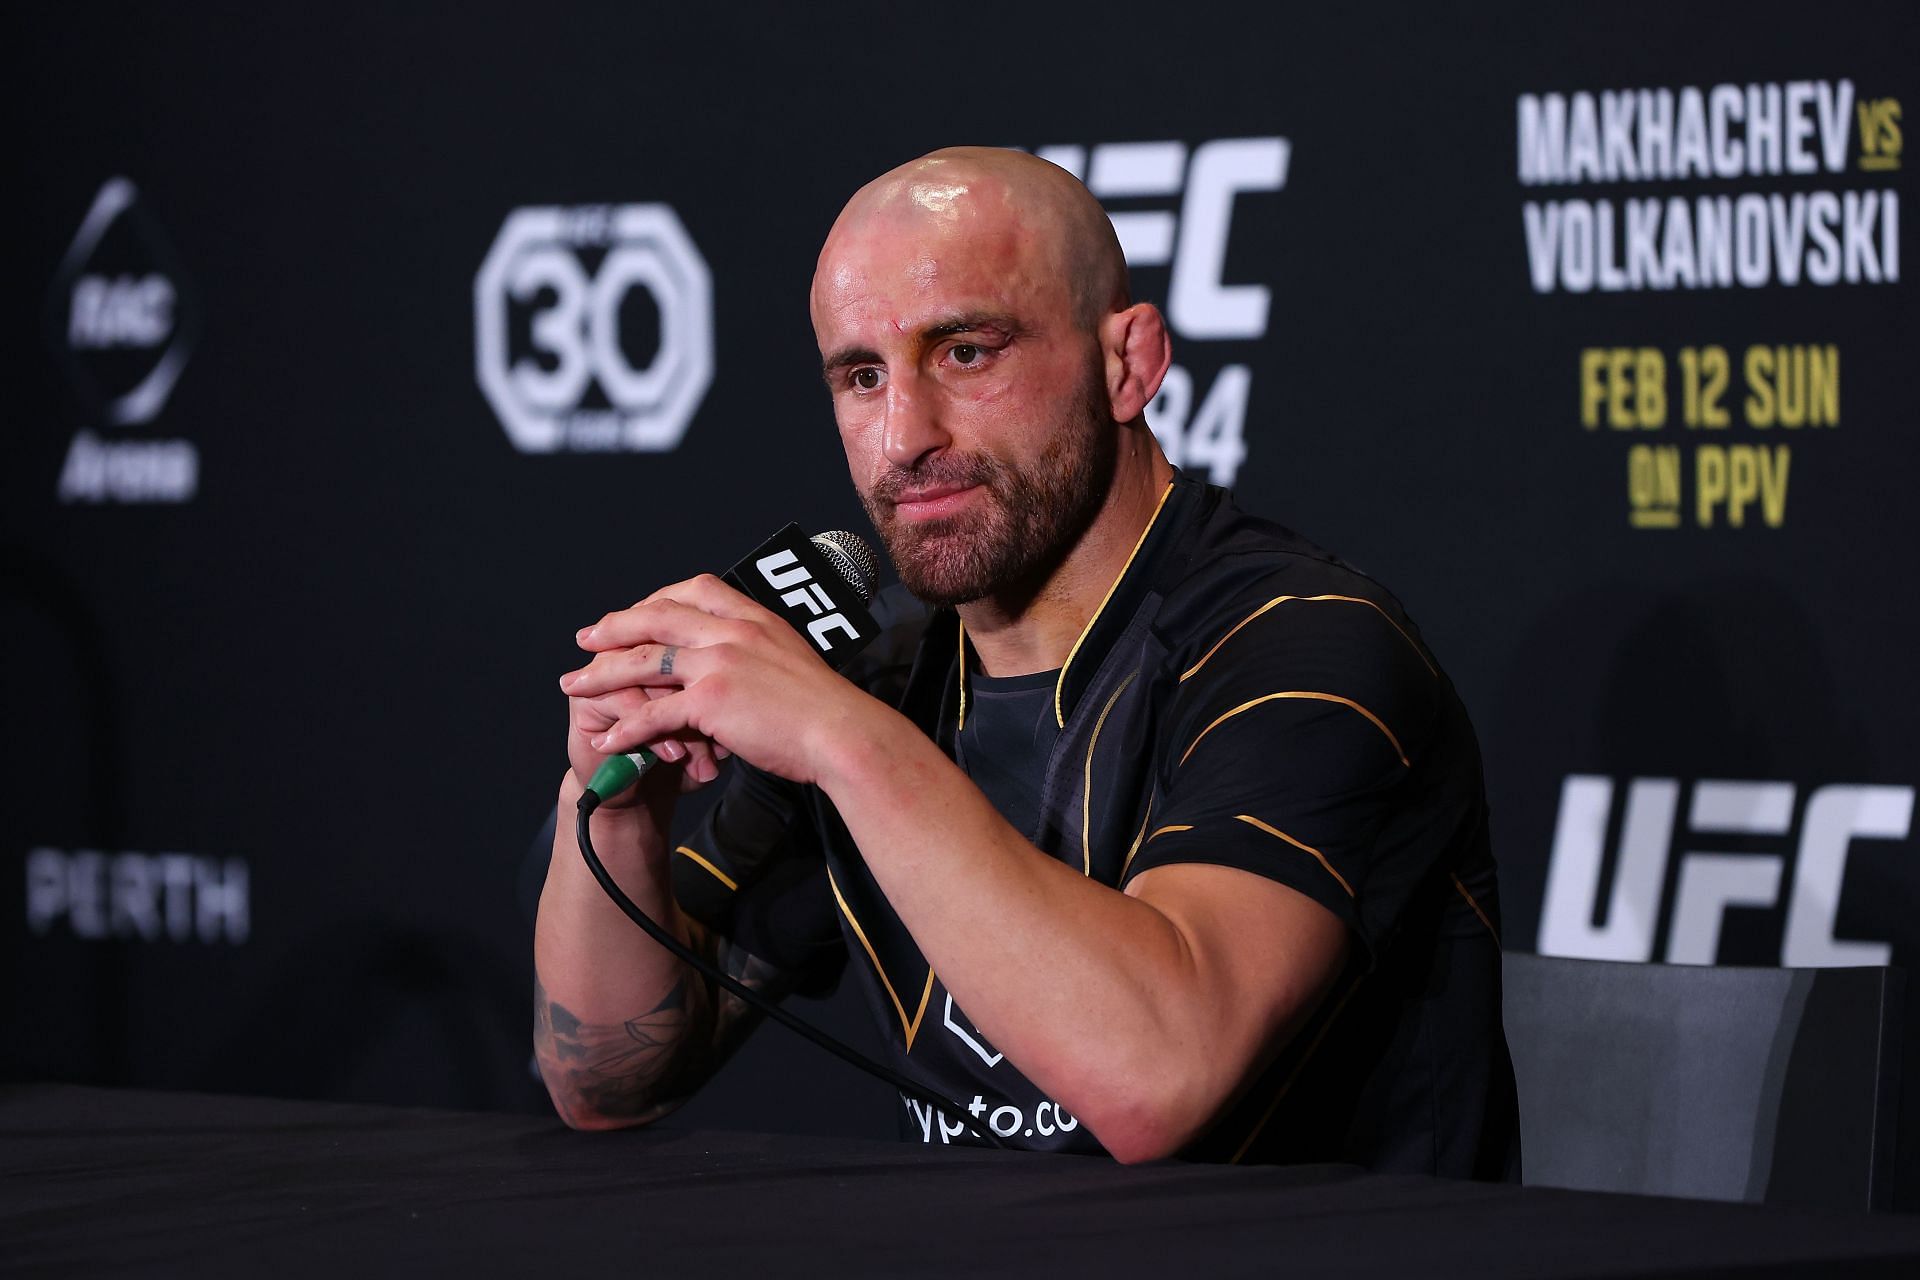 Alexander Volkanovski&#039;s mental state might be questionable after his loss to Islam Makhachev